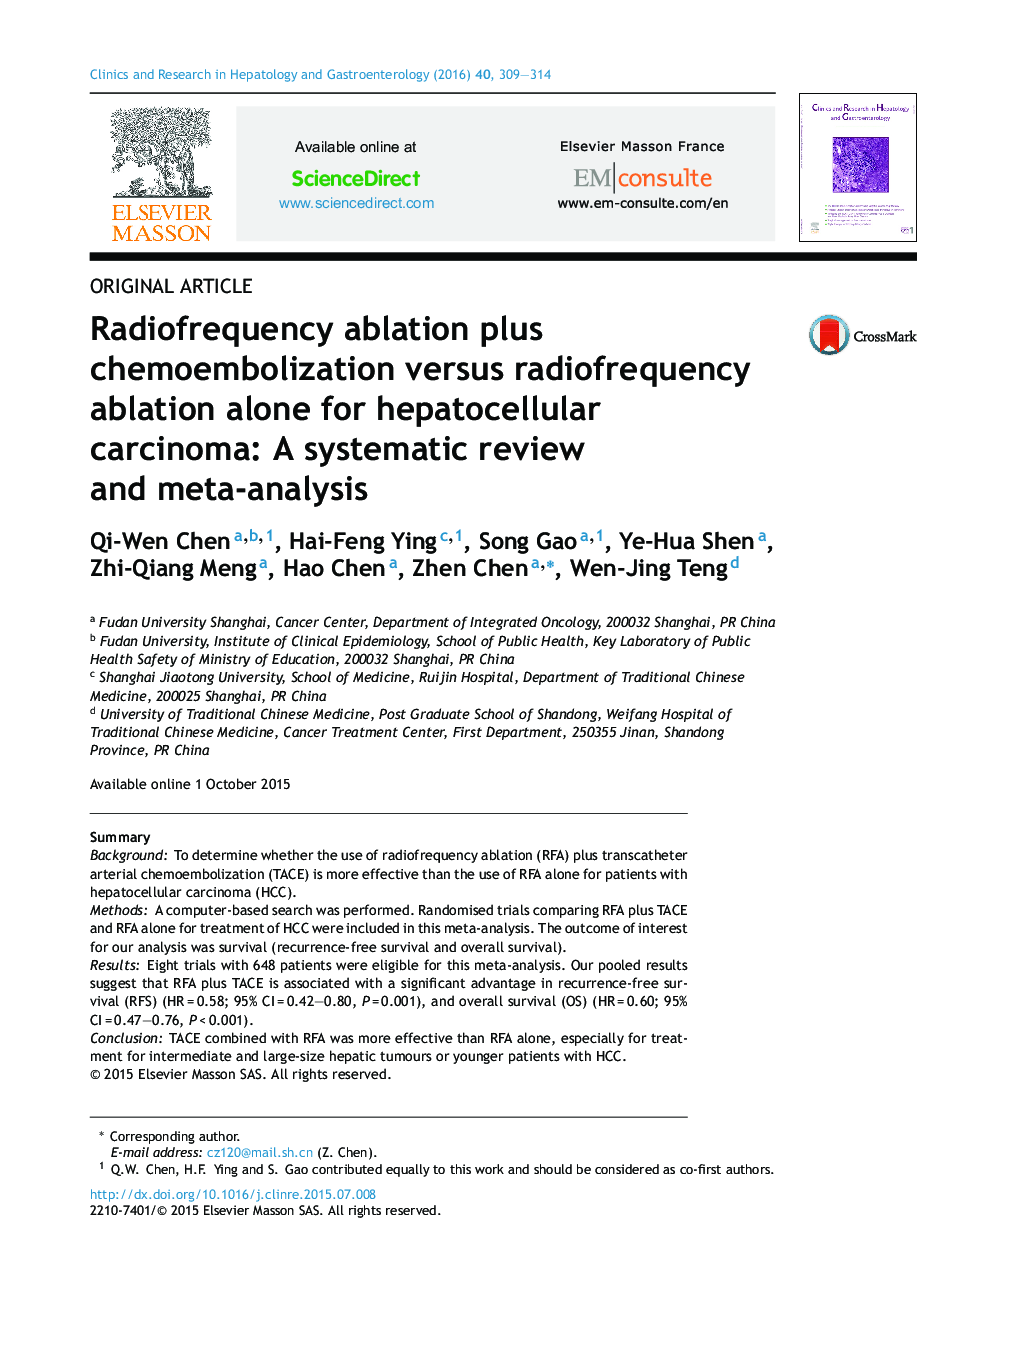 Radiofrequency ablation plus chemoembolization versus radiofrequency ablation alone for hepatocellular carcinoma: A systematic review and meta-analysis